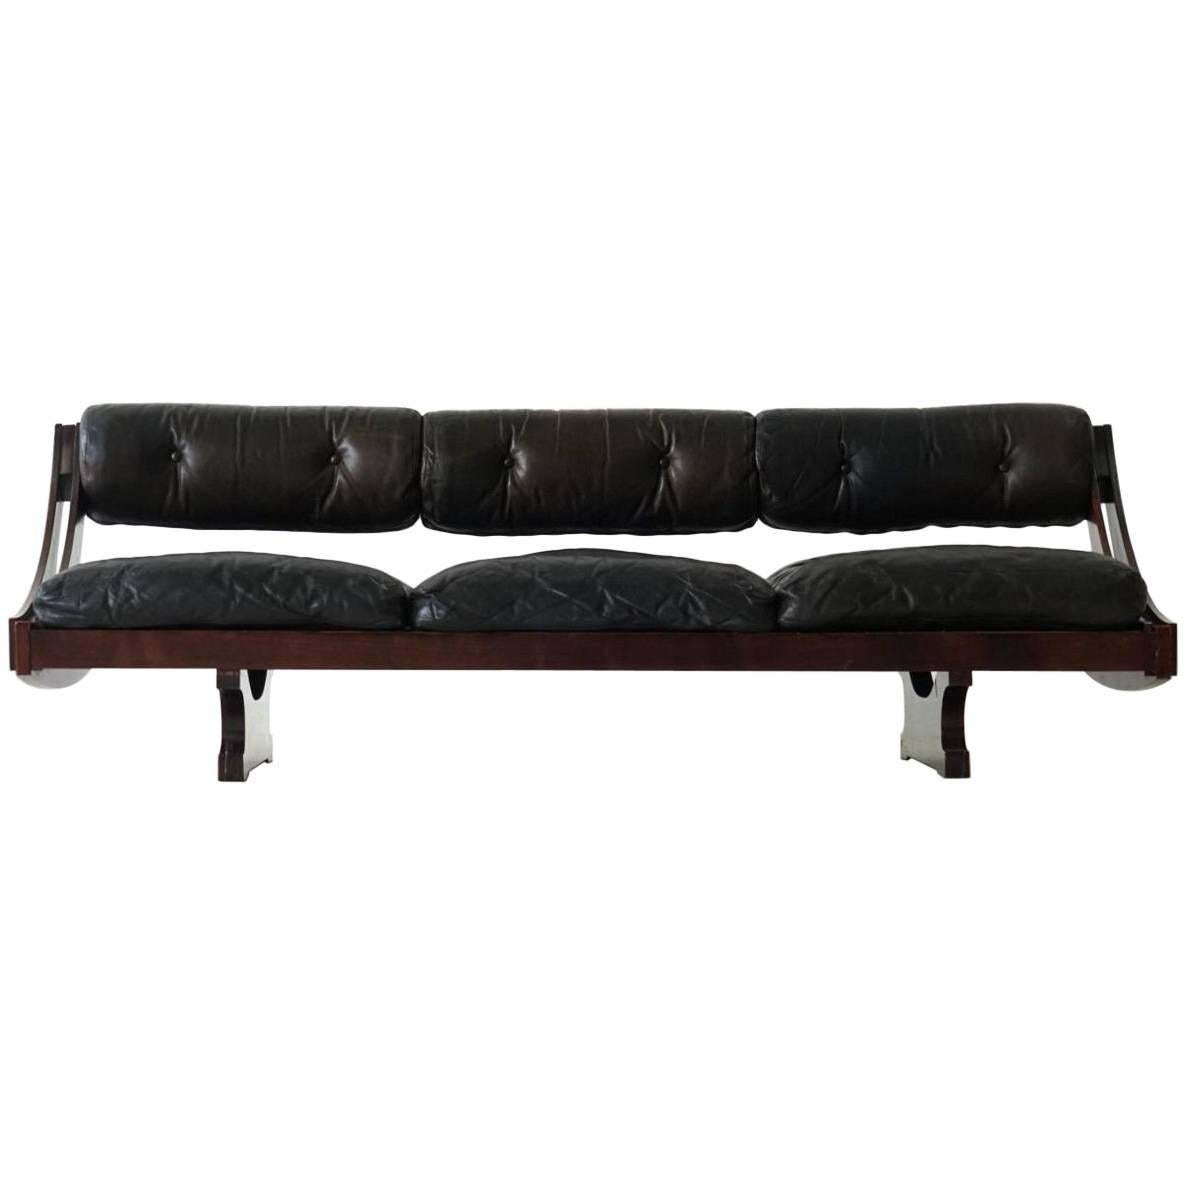 Sormani Songia GS 195 Leather Sofa Daybed